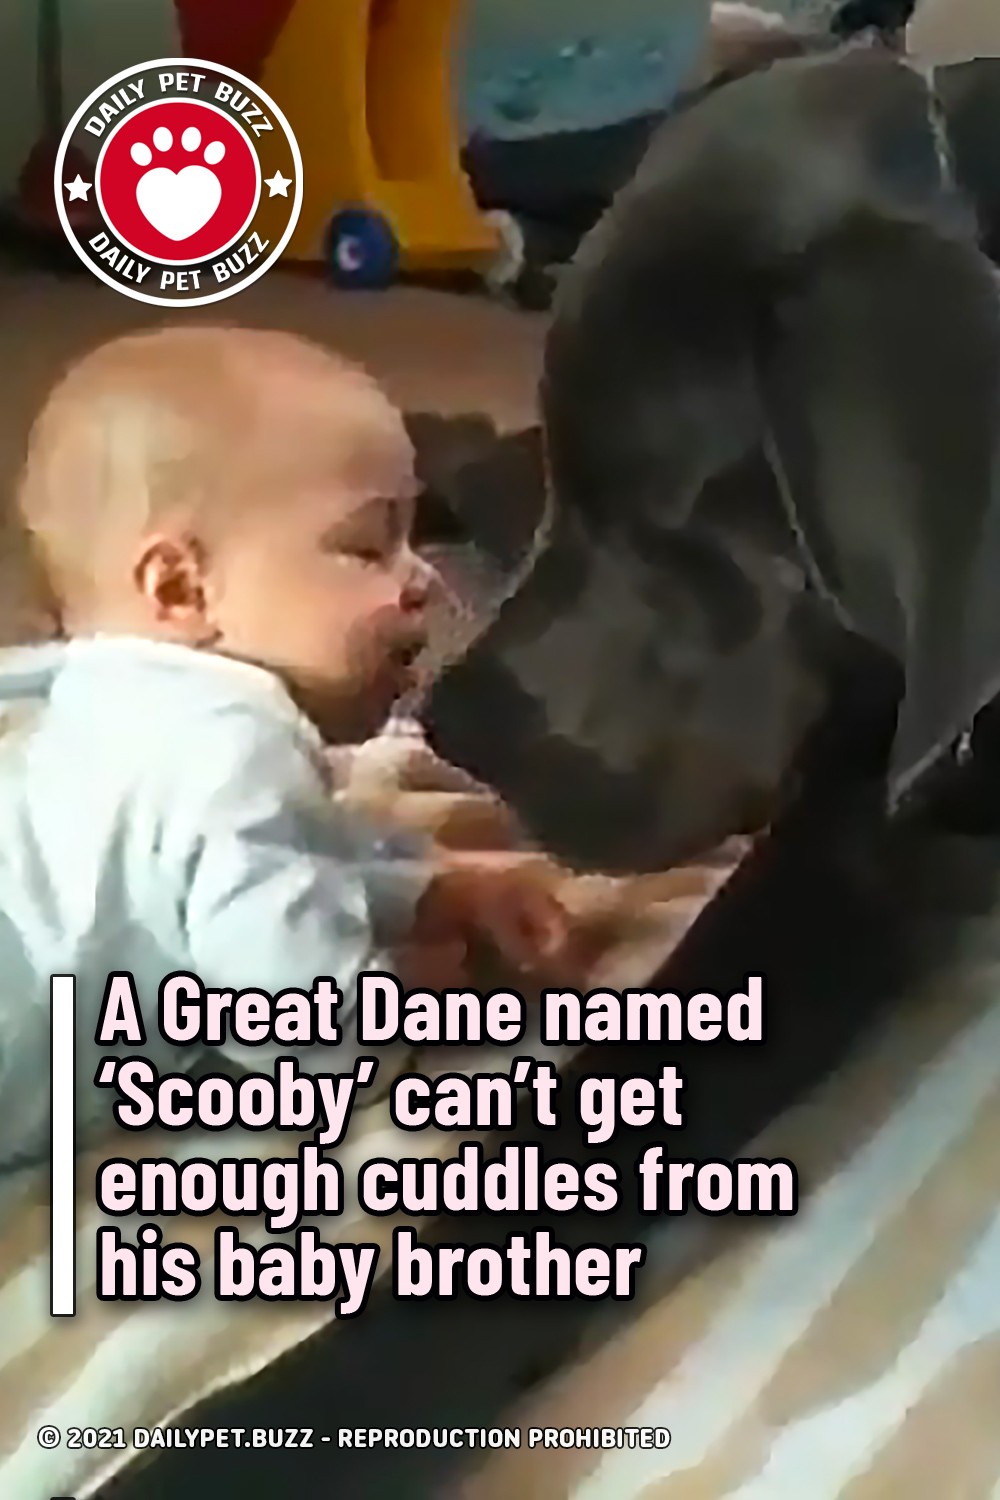 A Great Dane named ‘Scooby’ can’t get enough cuddles from his baby brother